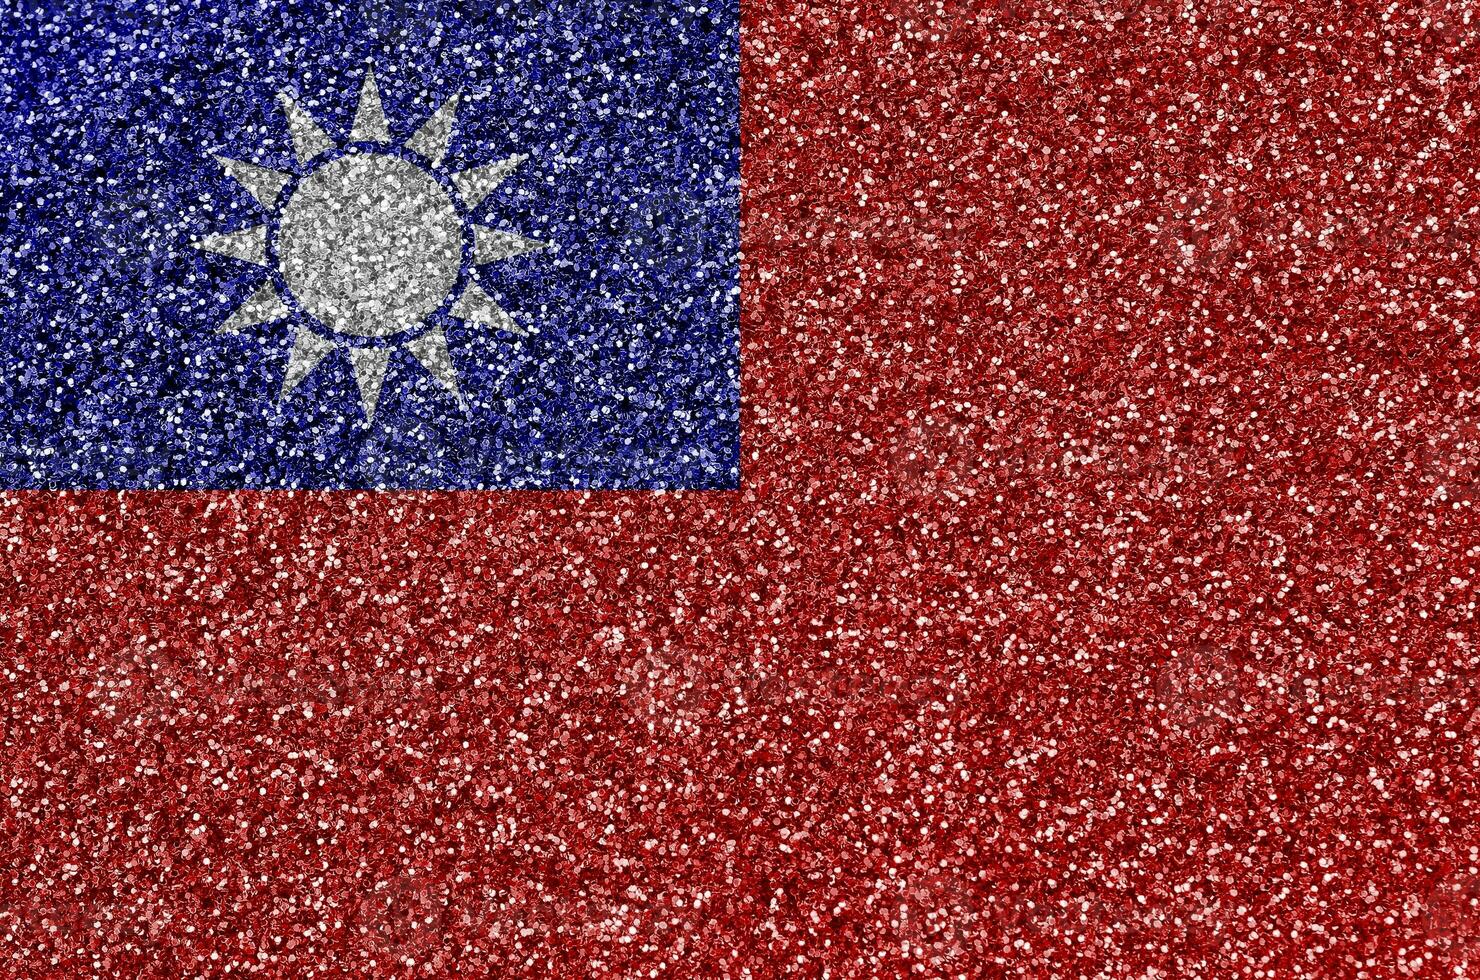 Taiwan flag depicted on many small shiny sequins. Colorful festival background for party photo